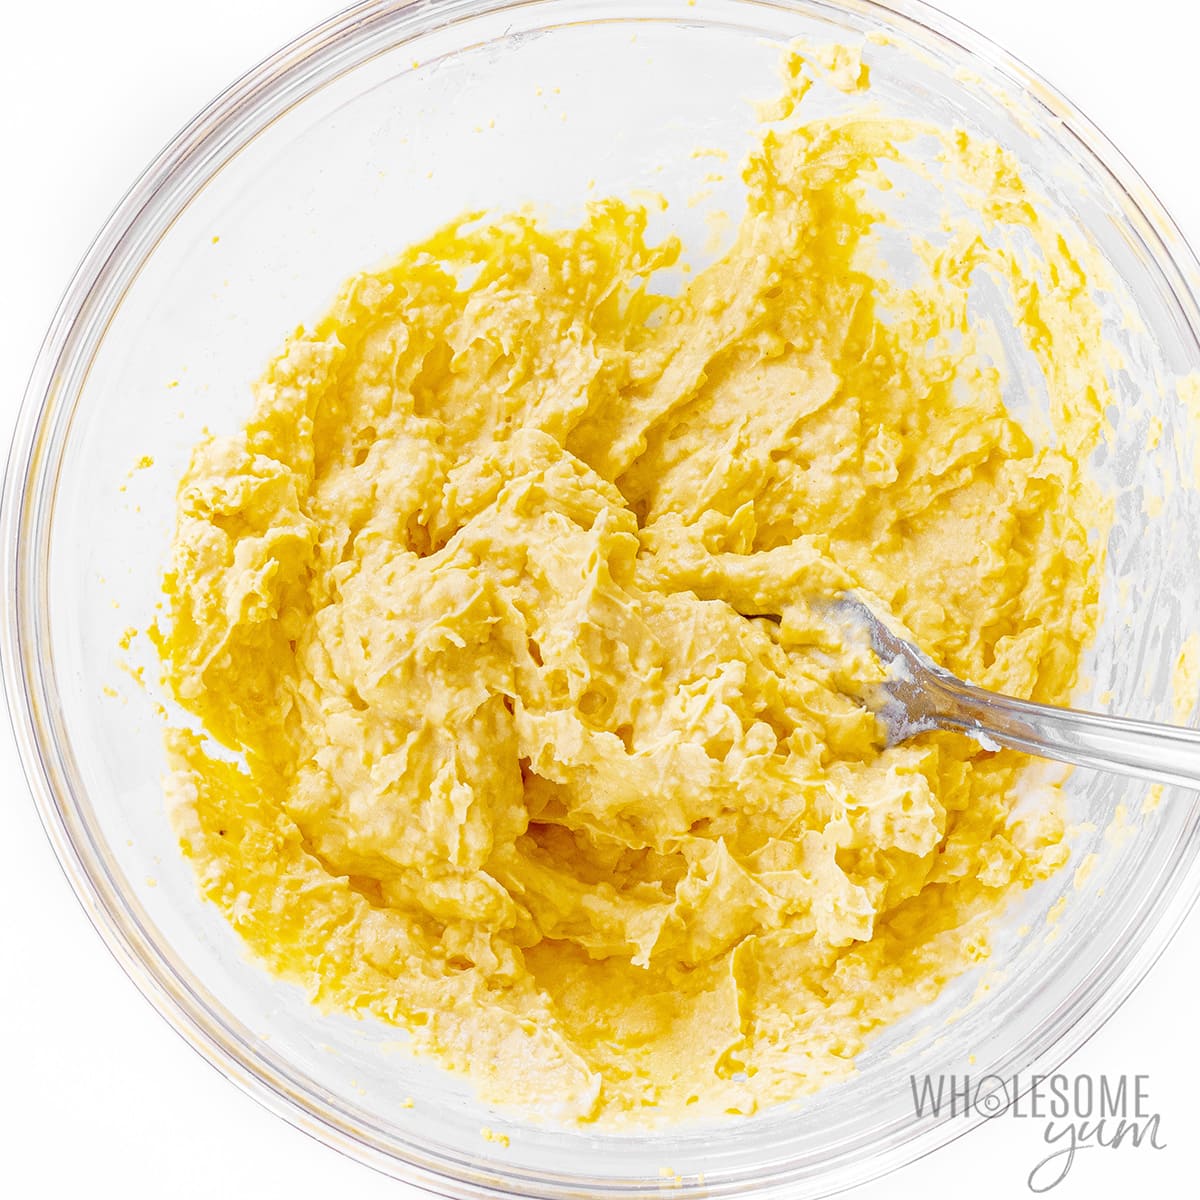 Egg yolks mashed and mixed with other ingredients in a bowl.